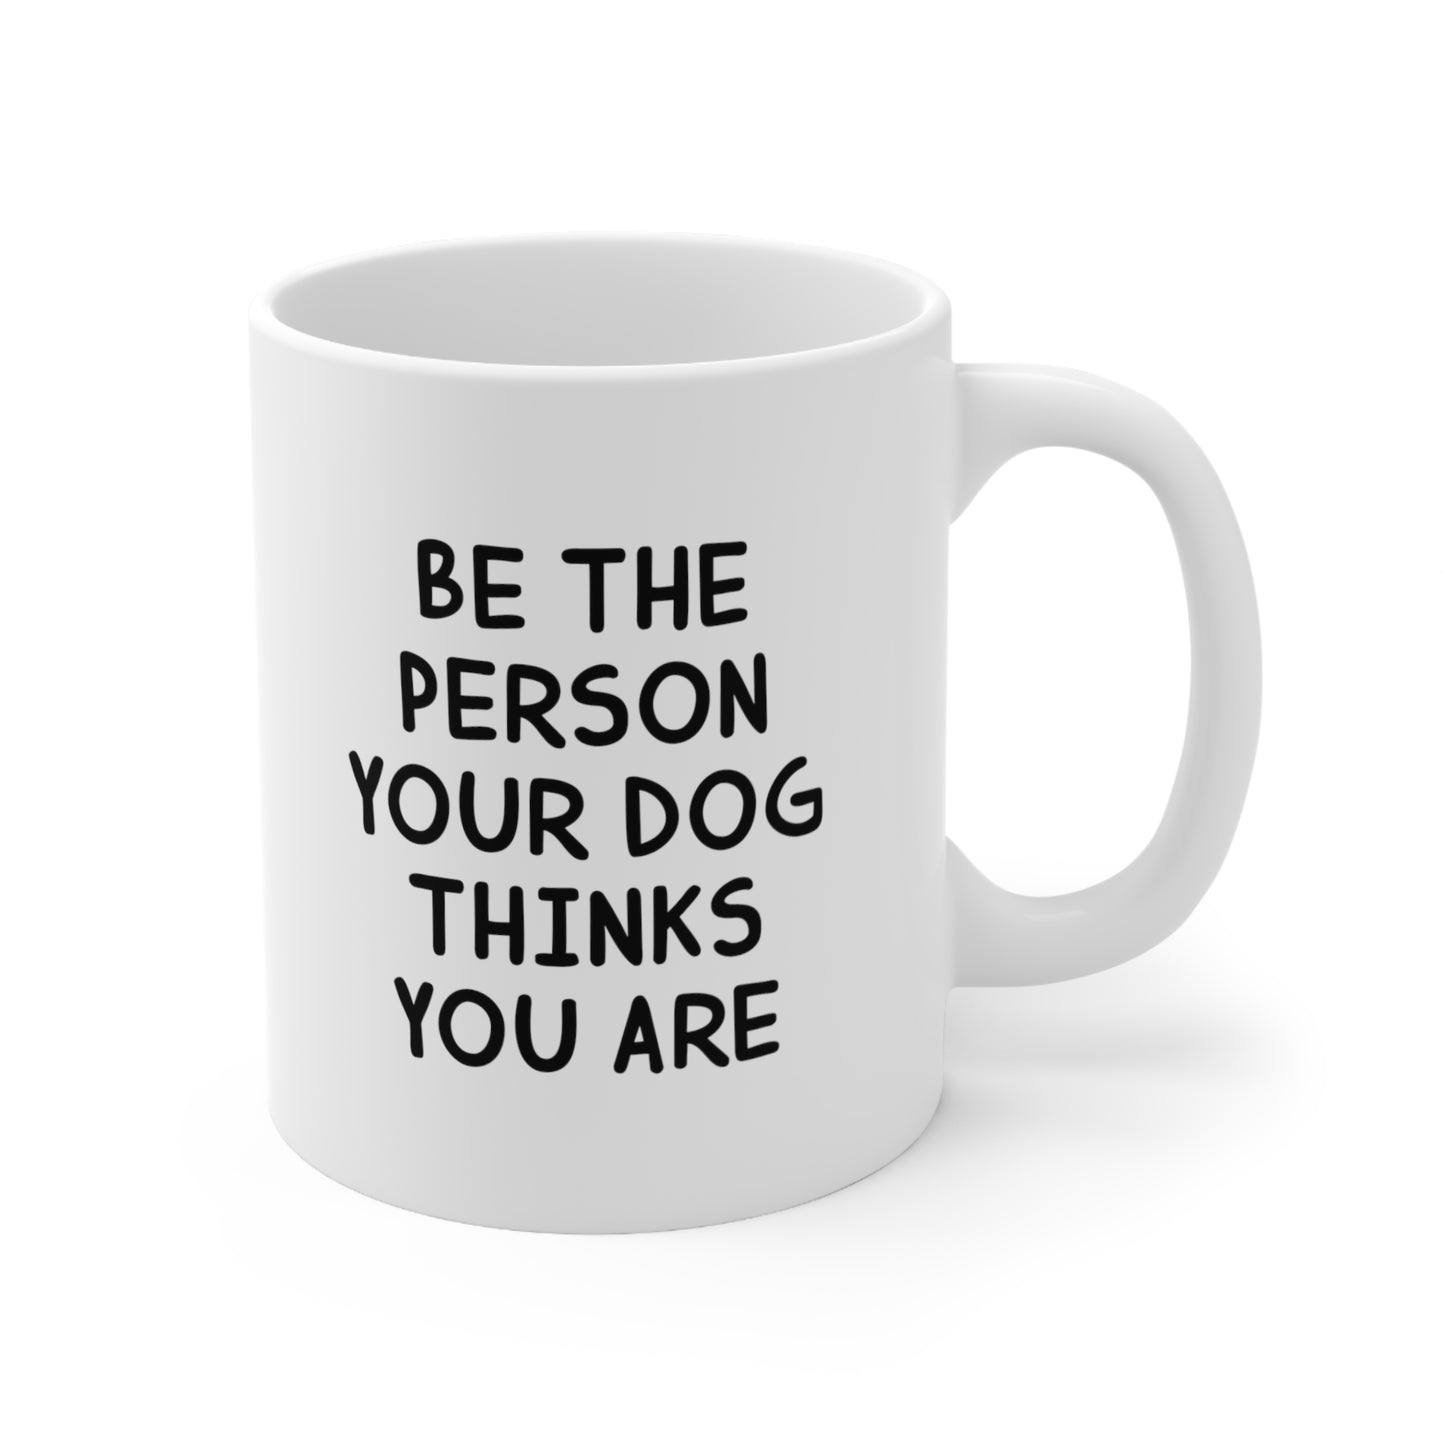 Be the person your dog thinks you are Coffee Mug 11oz